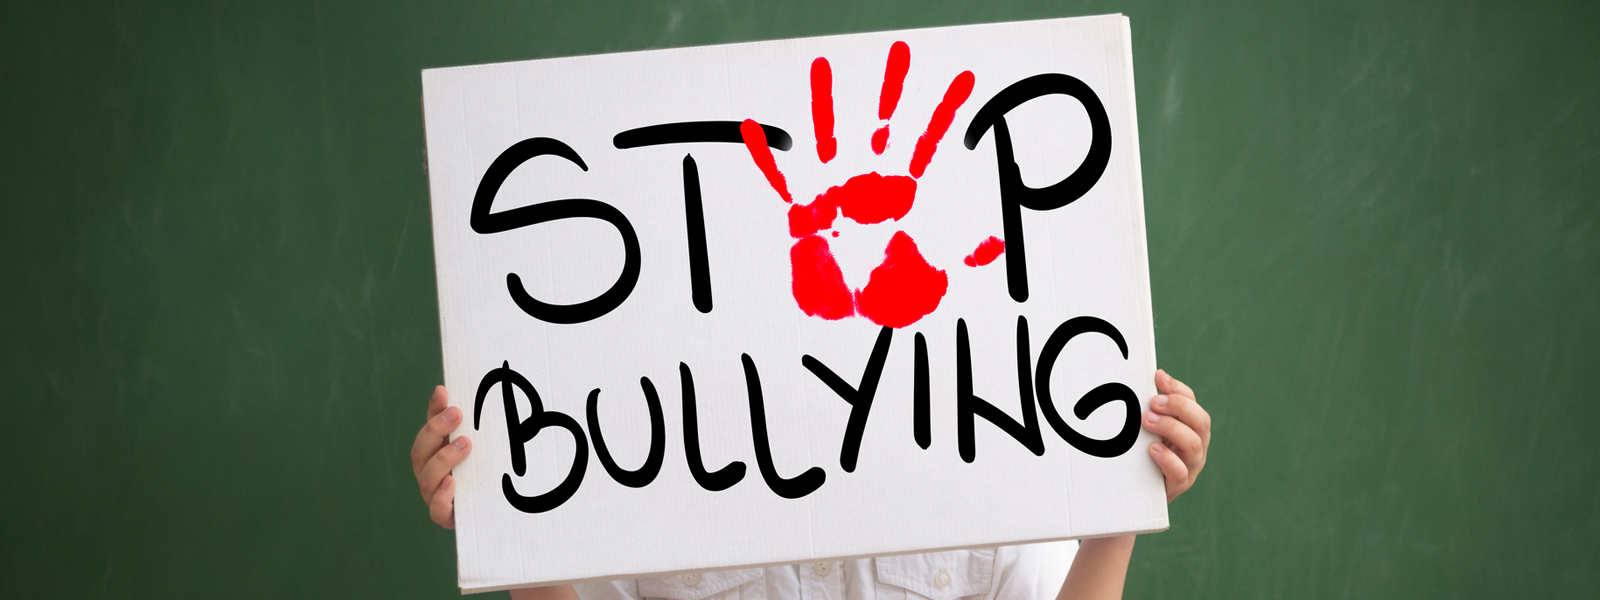 student holding a sign with red palm print and text stop bullying against a green chalkboard background